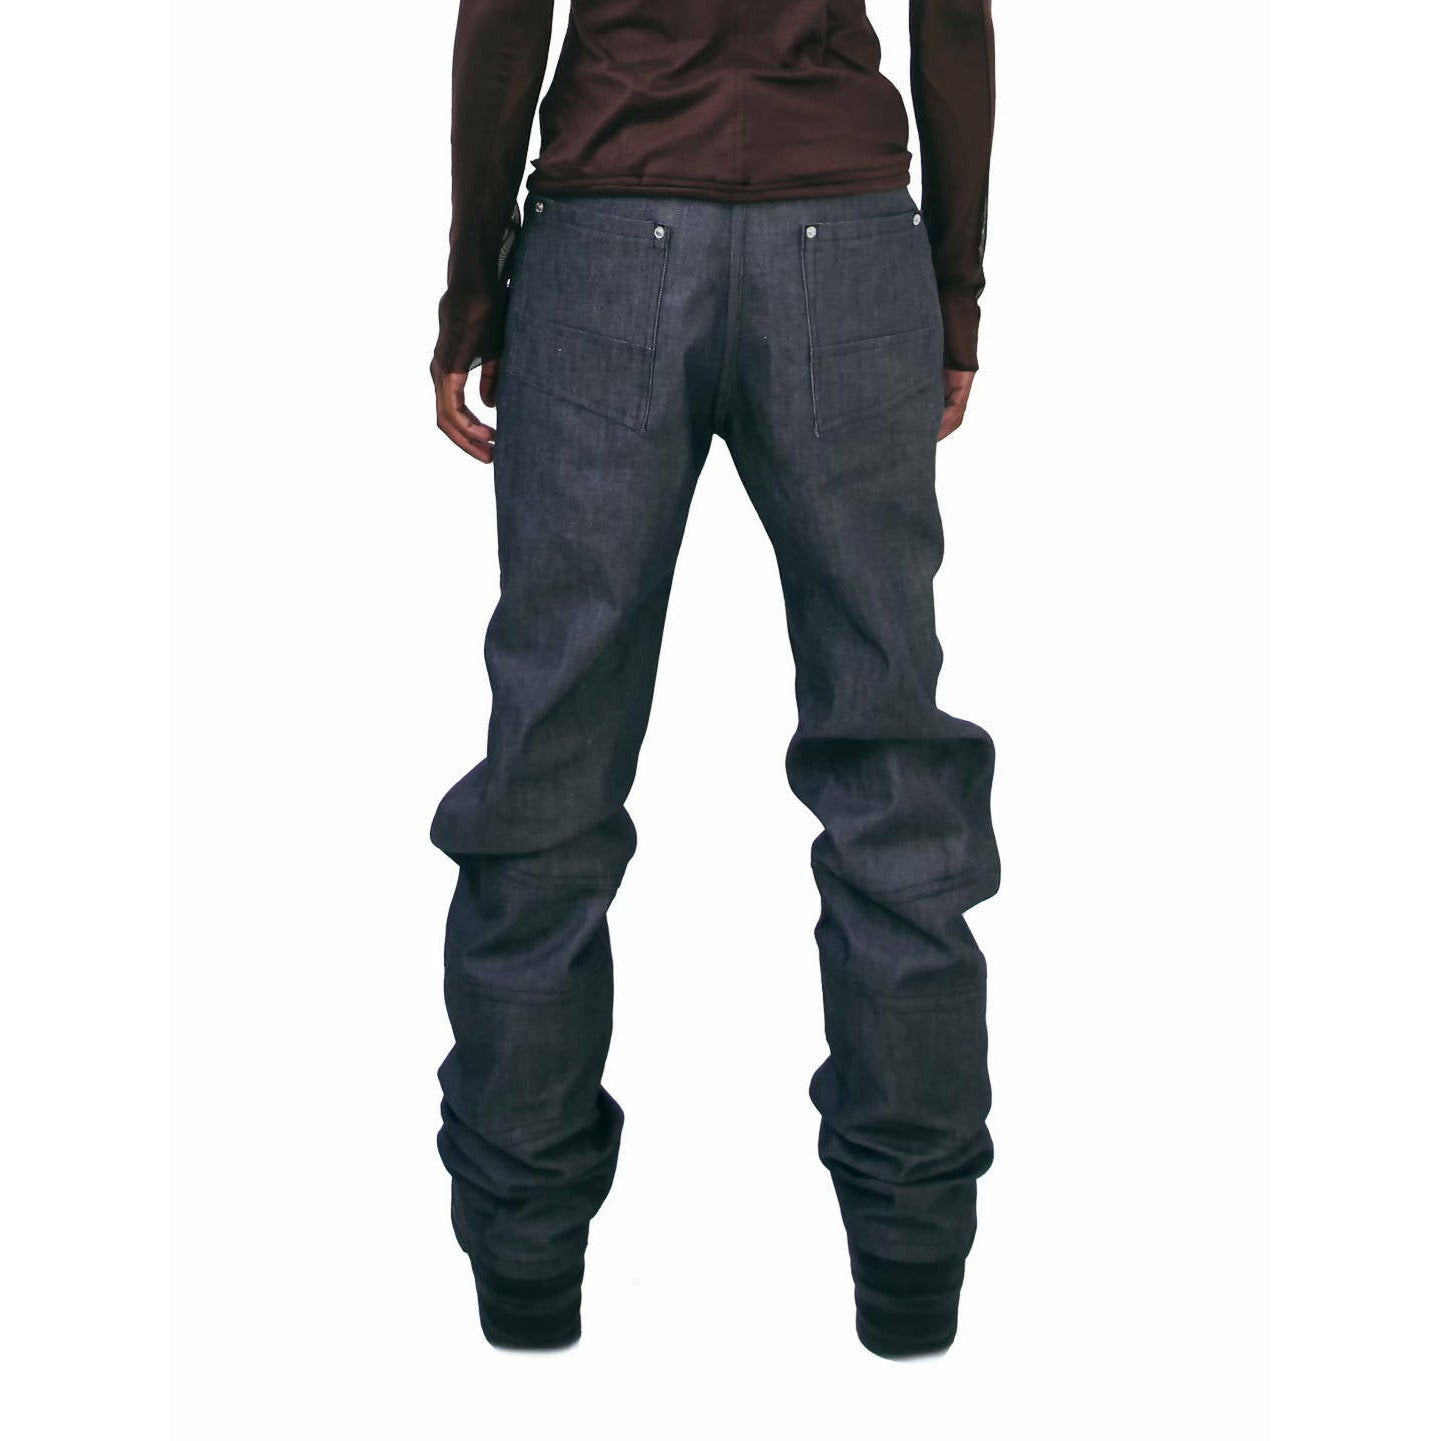 [MADE TO ORDER] THE WRAITH TROUSER